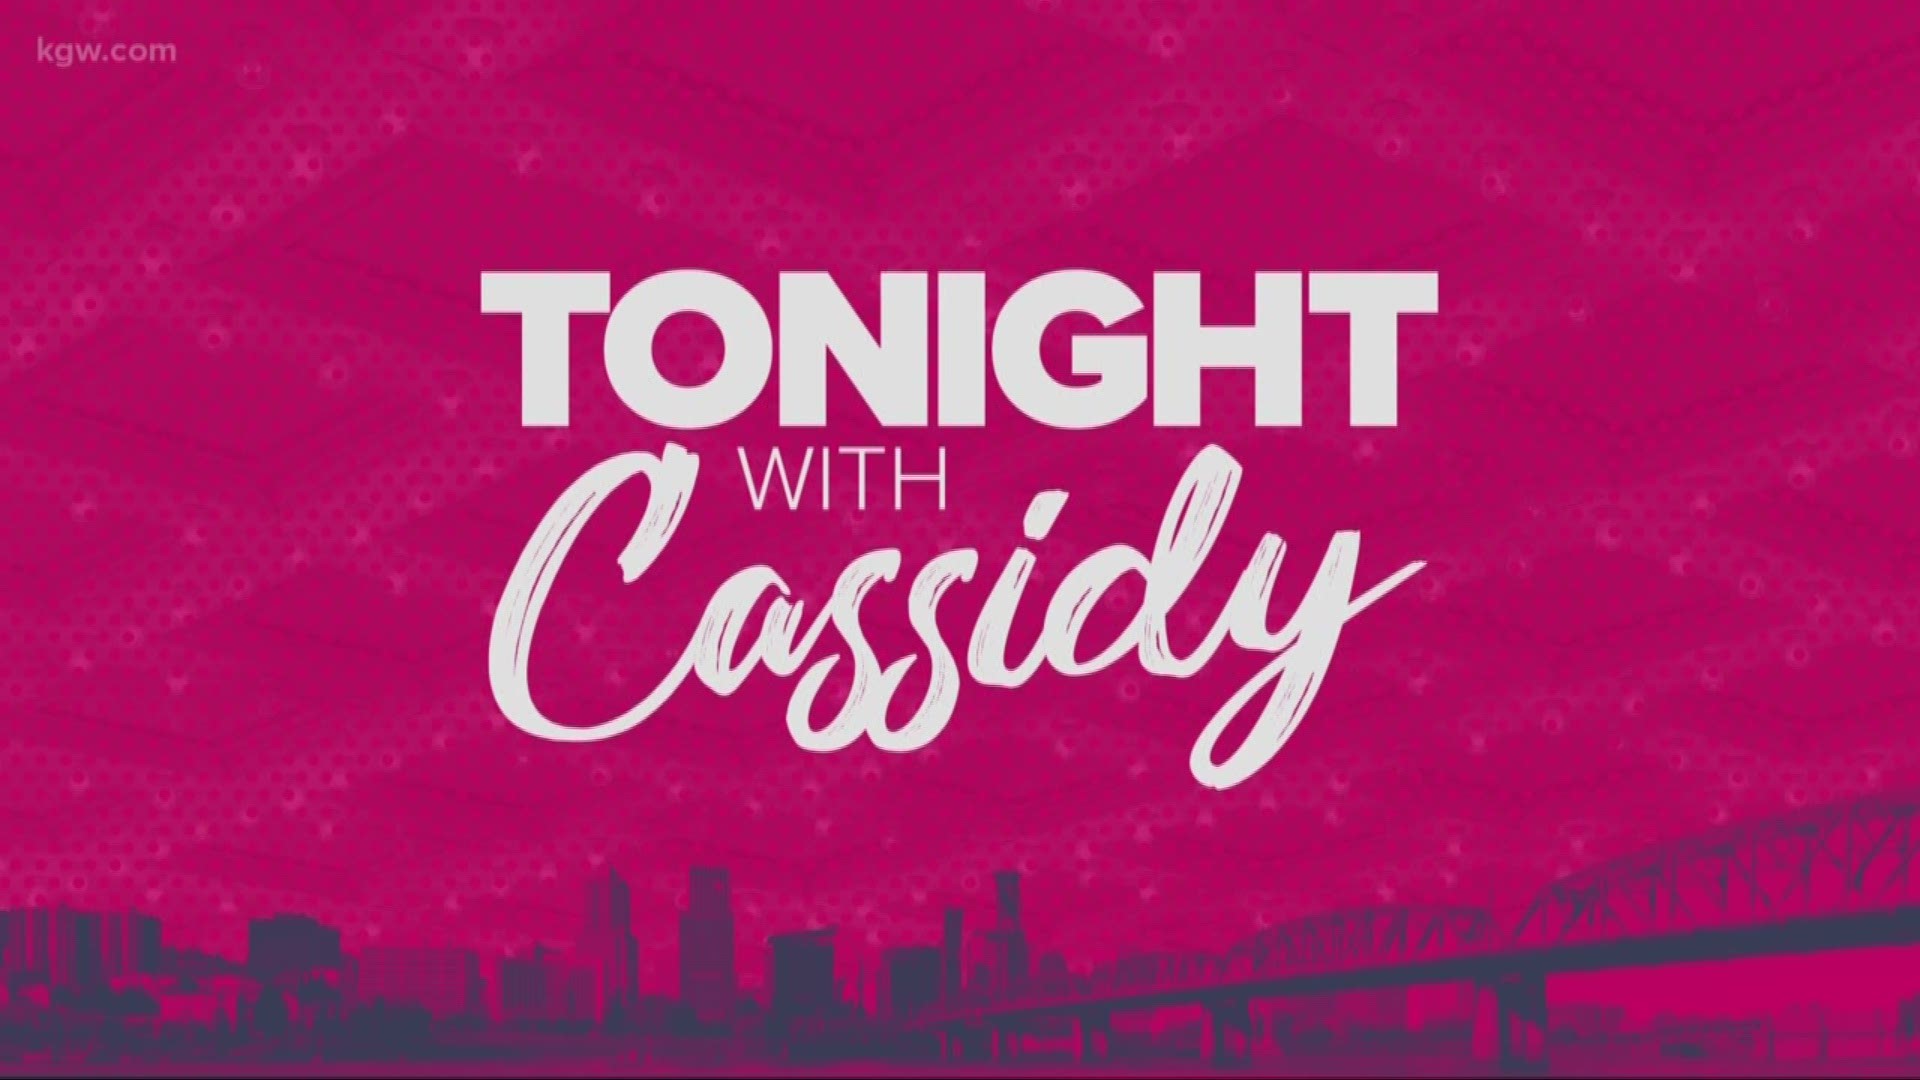 Join the 'Kickin' it with Cassidy" facebook page to join our second adulting challenge.
#TonightwithCassidy
